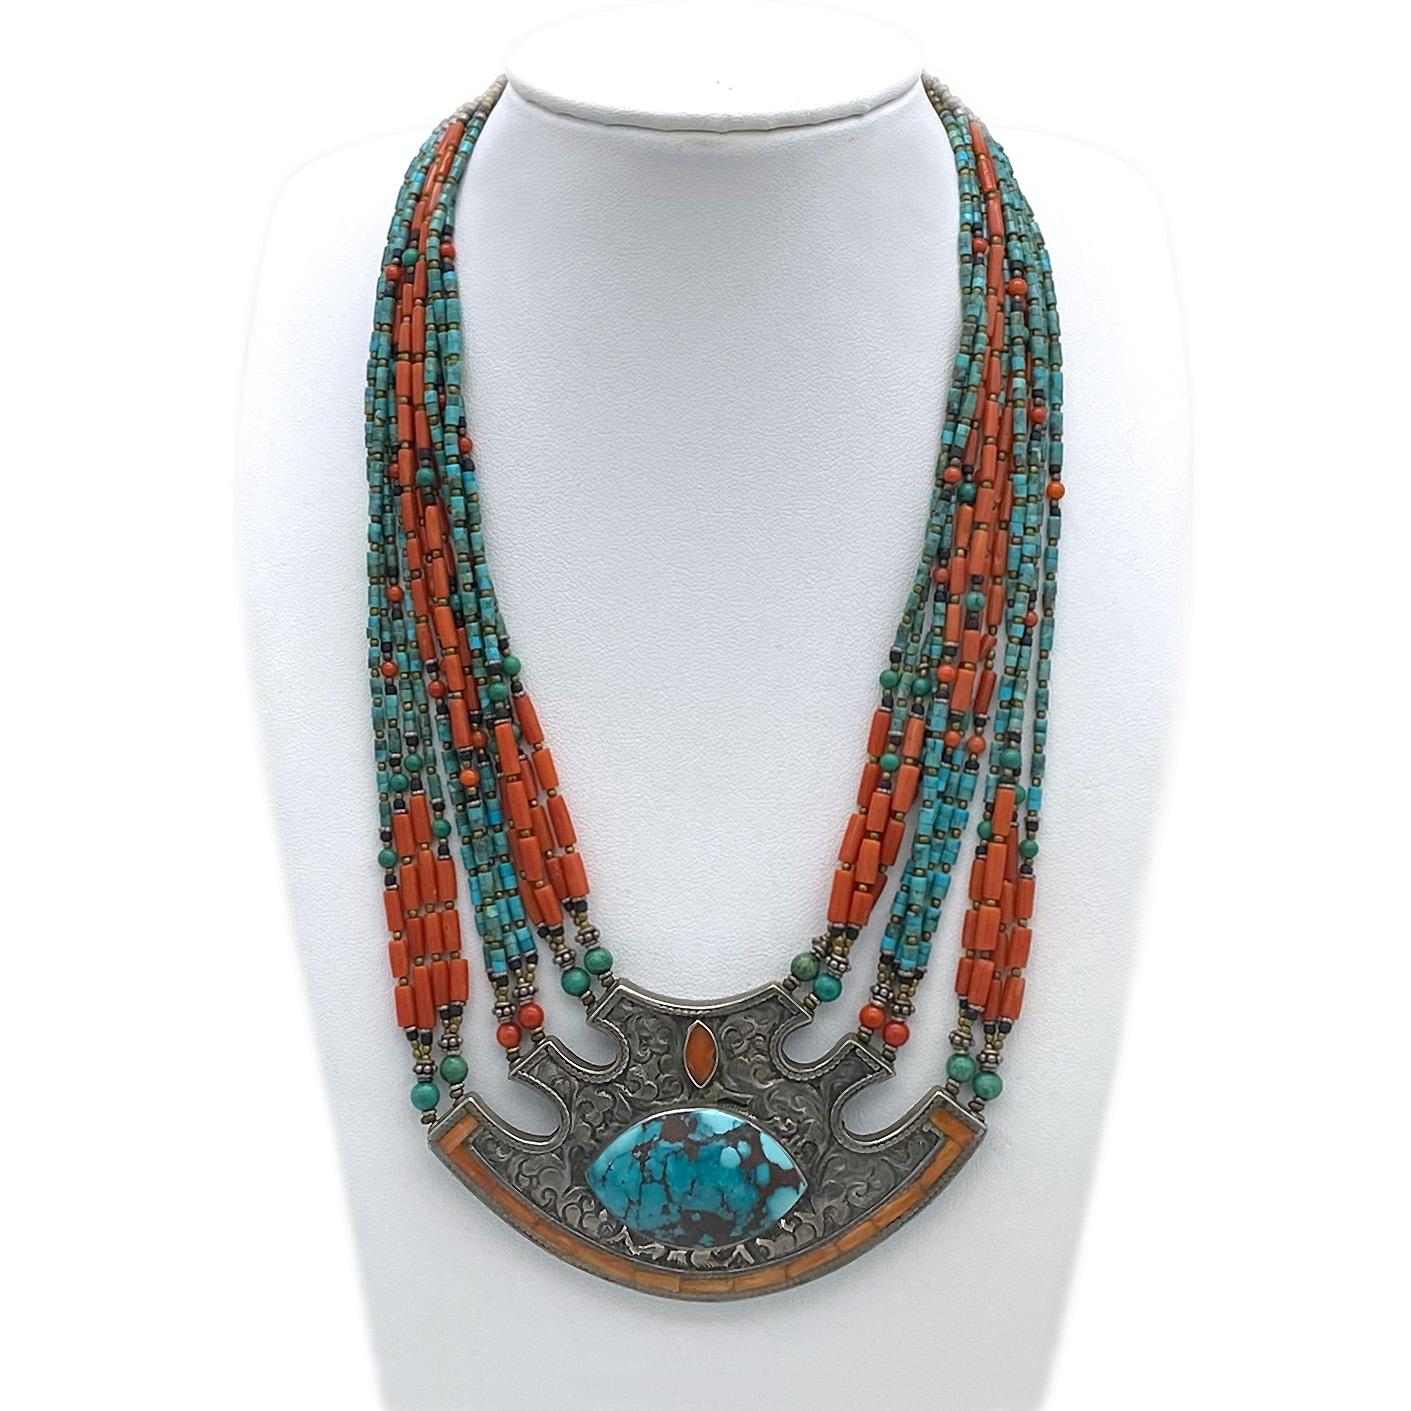 This is a coral & turquoise multi-strand necklace. I bought this hand crafted Egyptian Revival necklace at a jewelry store in Istanbul many years ago. Twelve strands of small beads connect with a large vintage sculpted, patterned, bezel set and